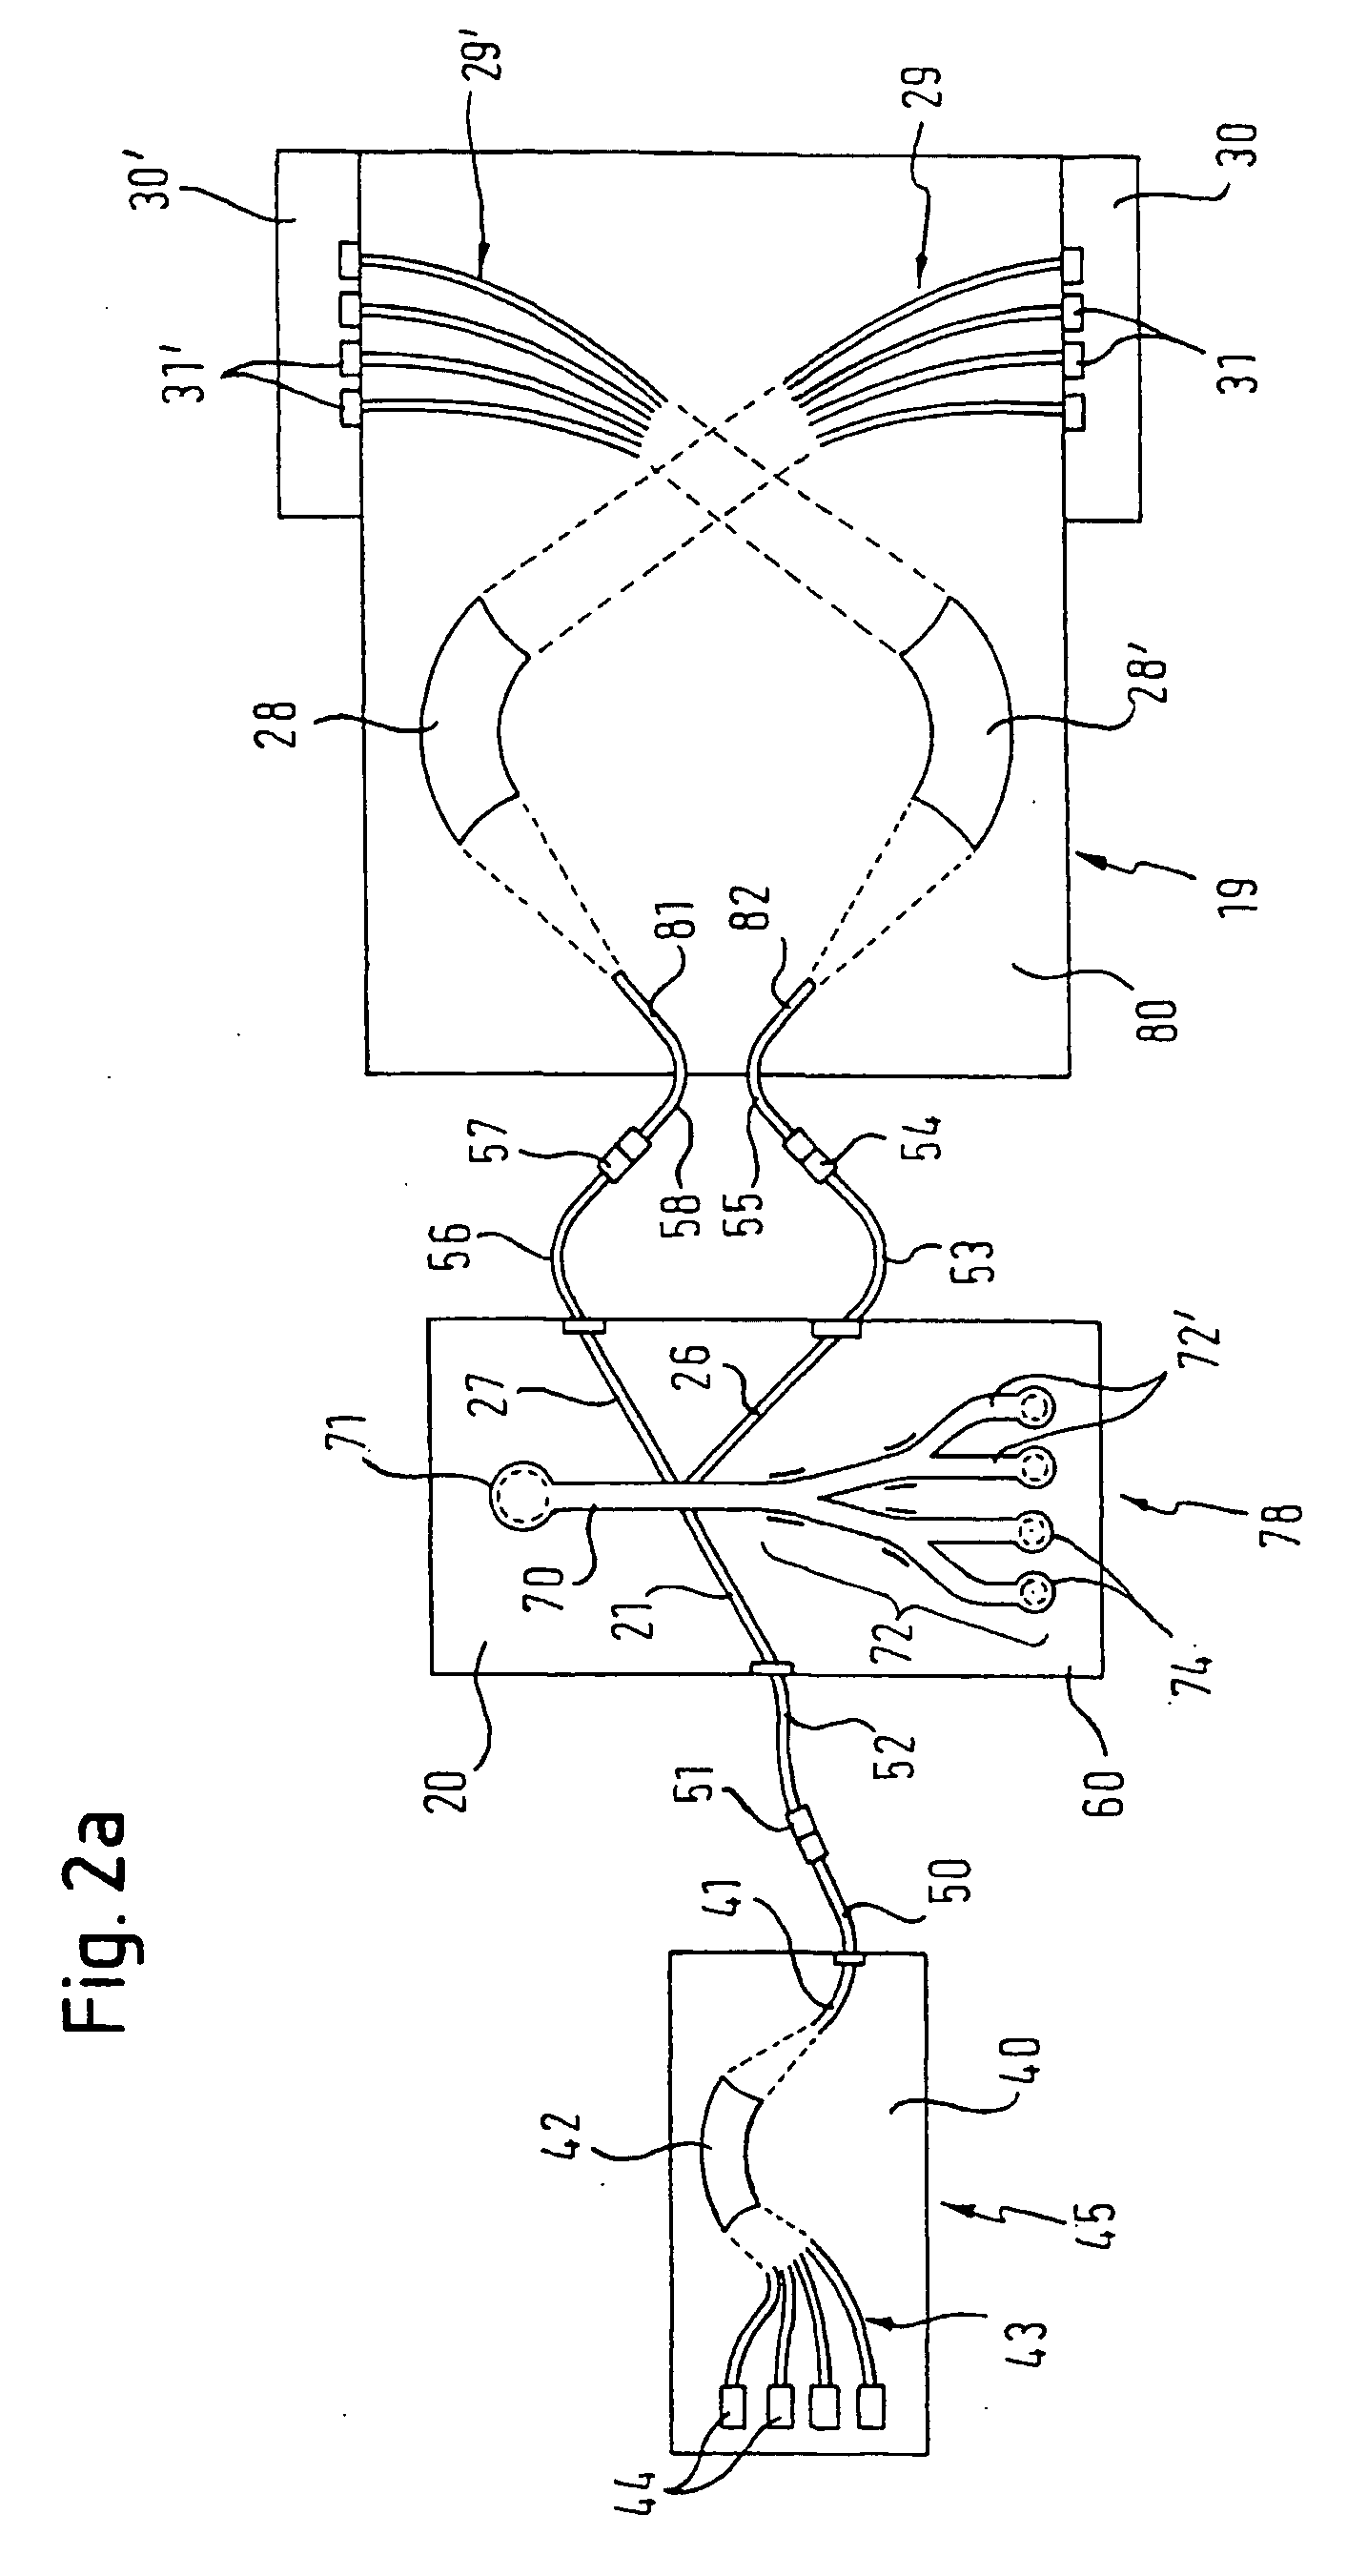 Device and method for invetigating analytes in liquid suspension or solution